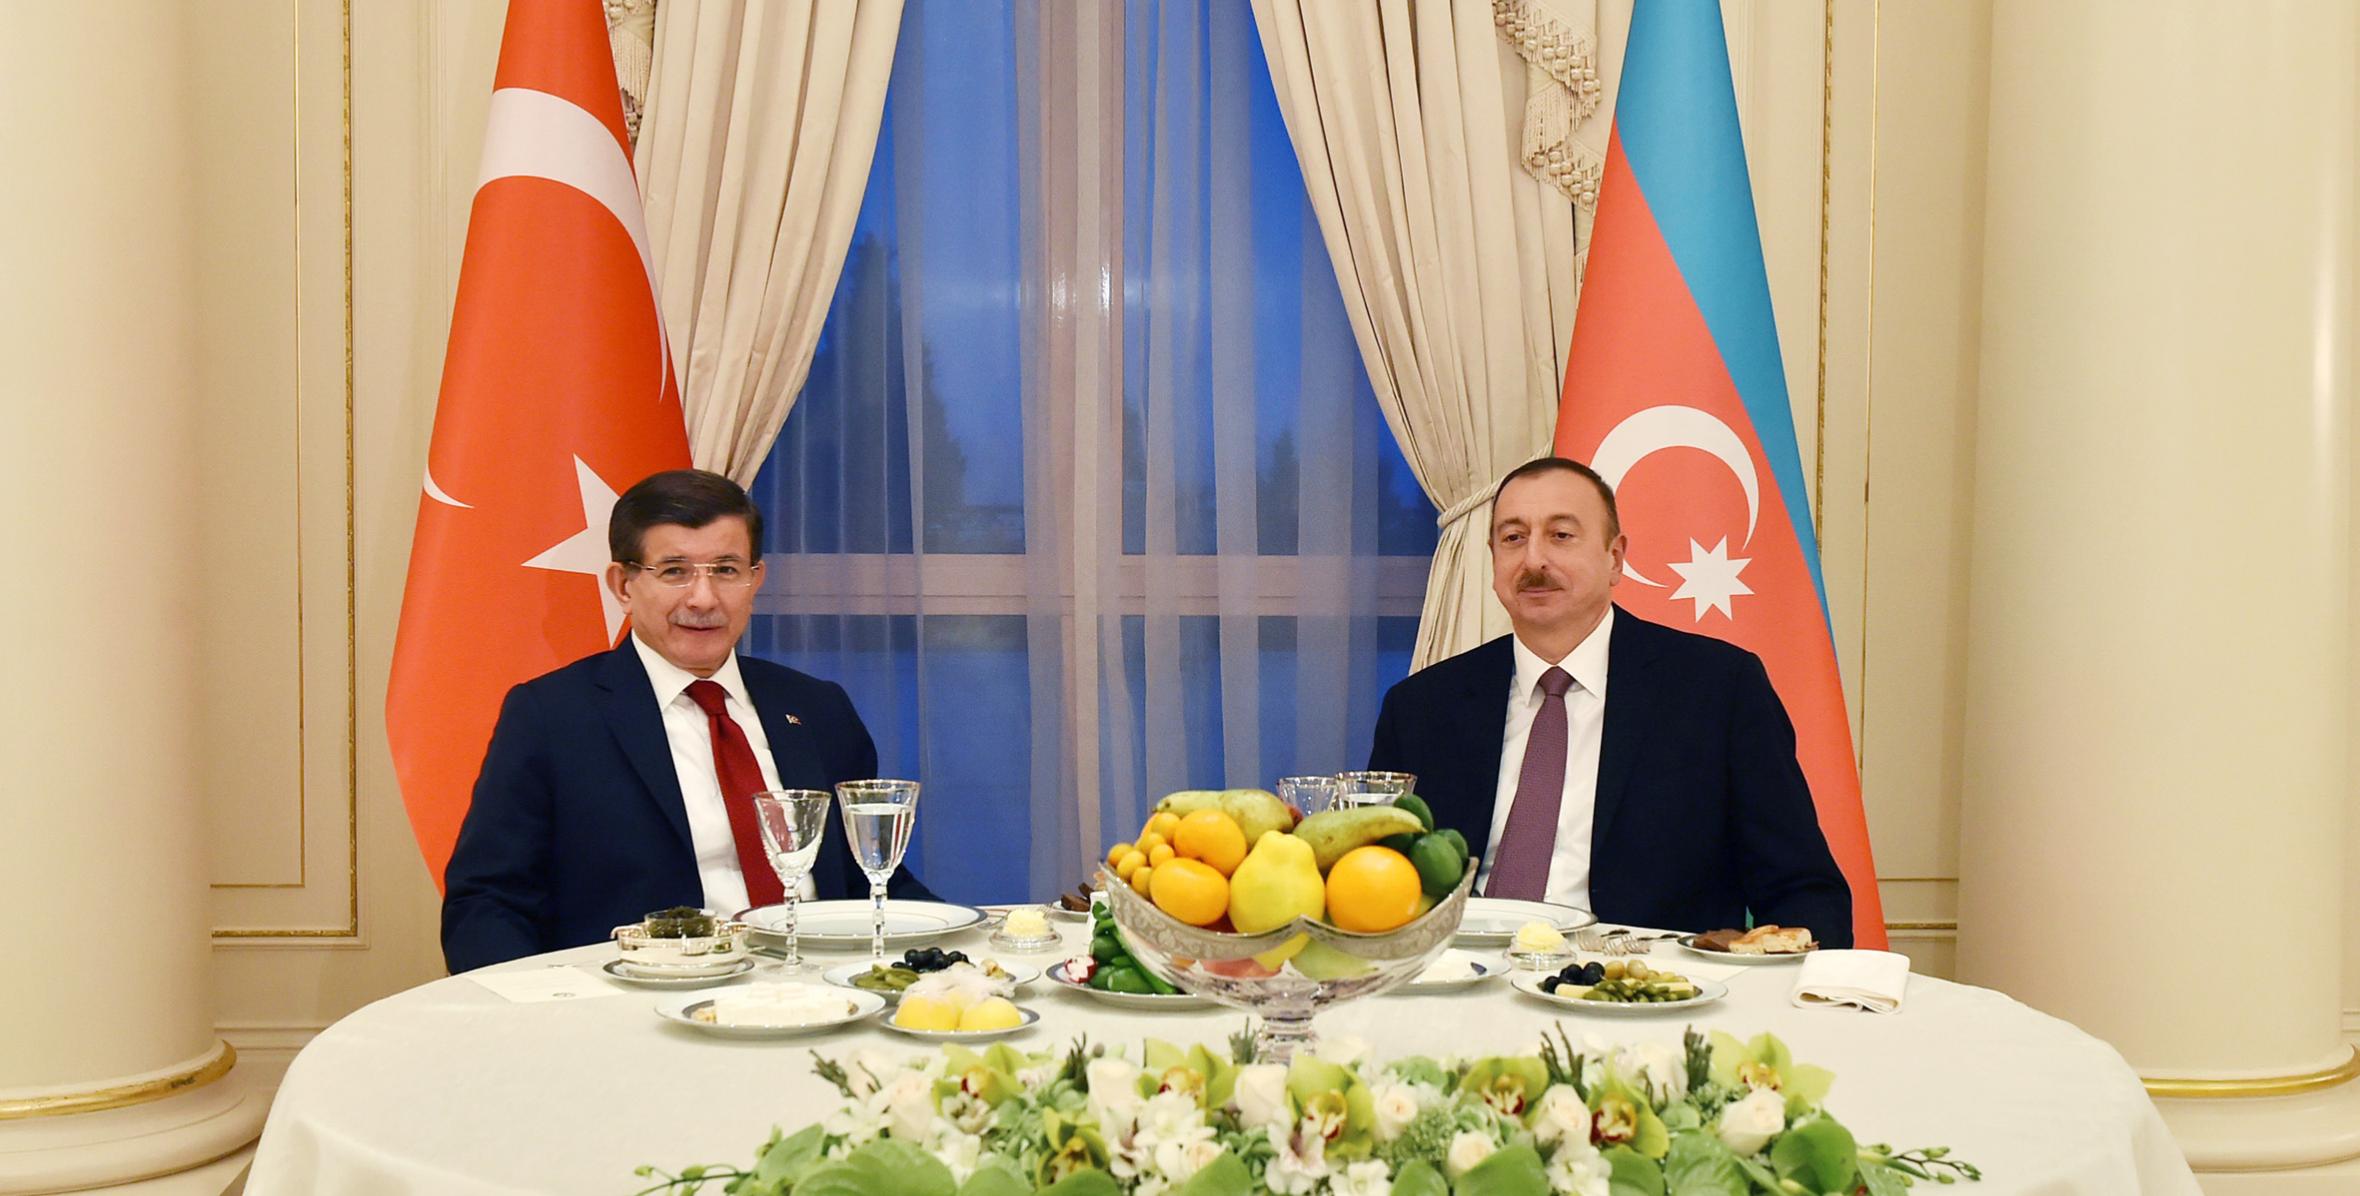 Dinner reception was hosted on behalf of Ilham Aliyev in honor of Turkish Prime Minister Ahmet Davutoglu